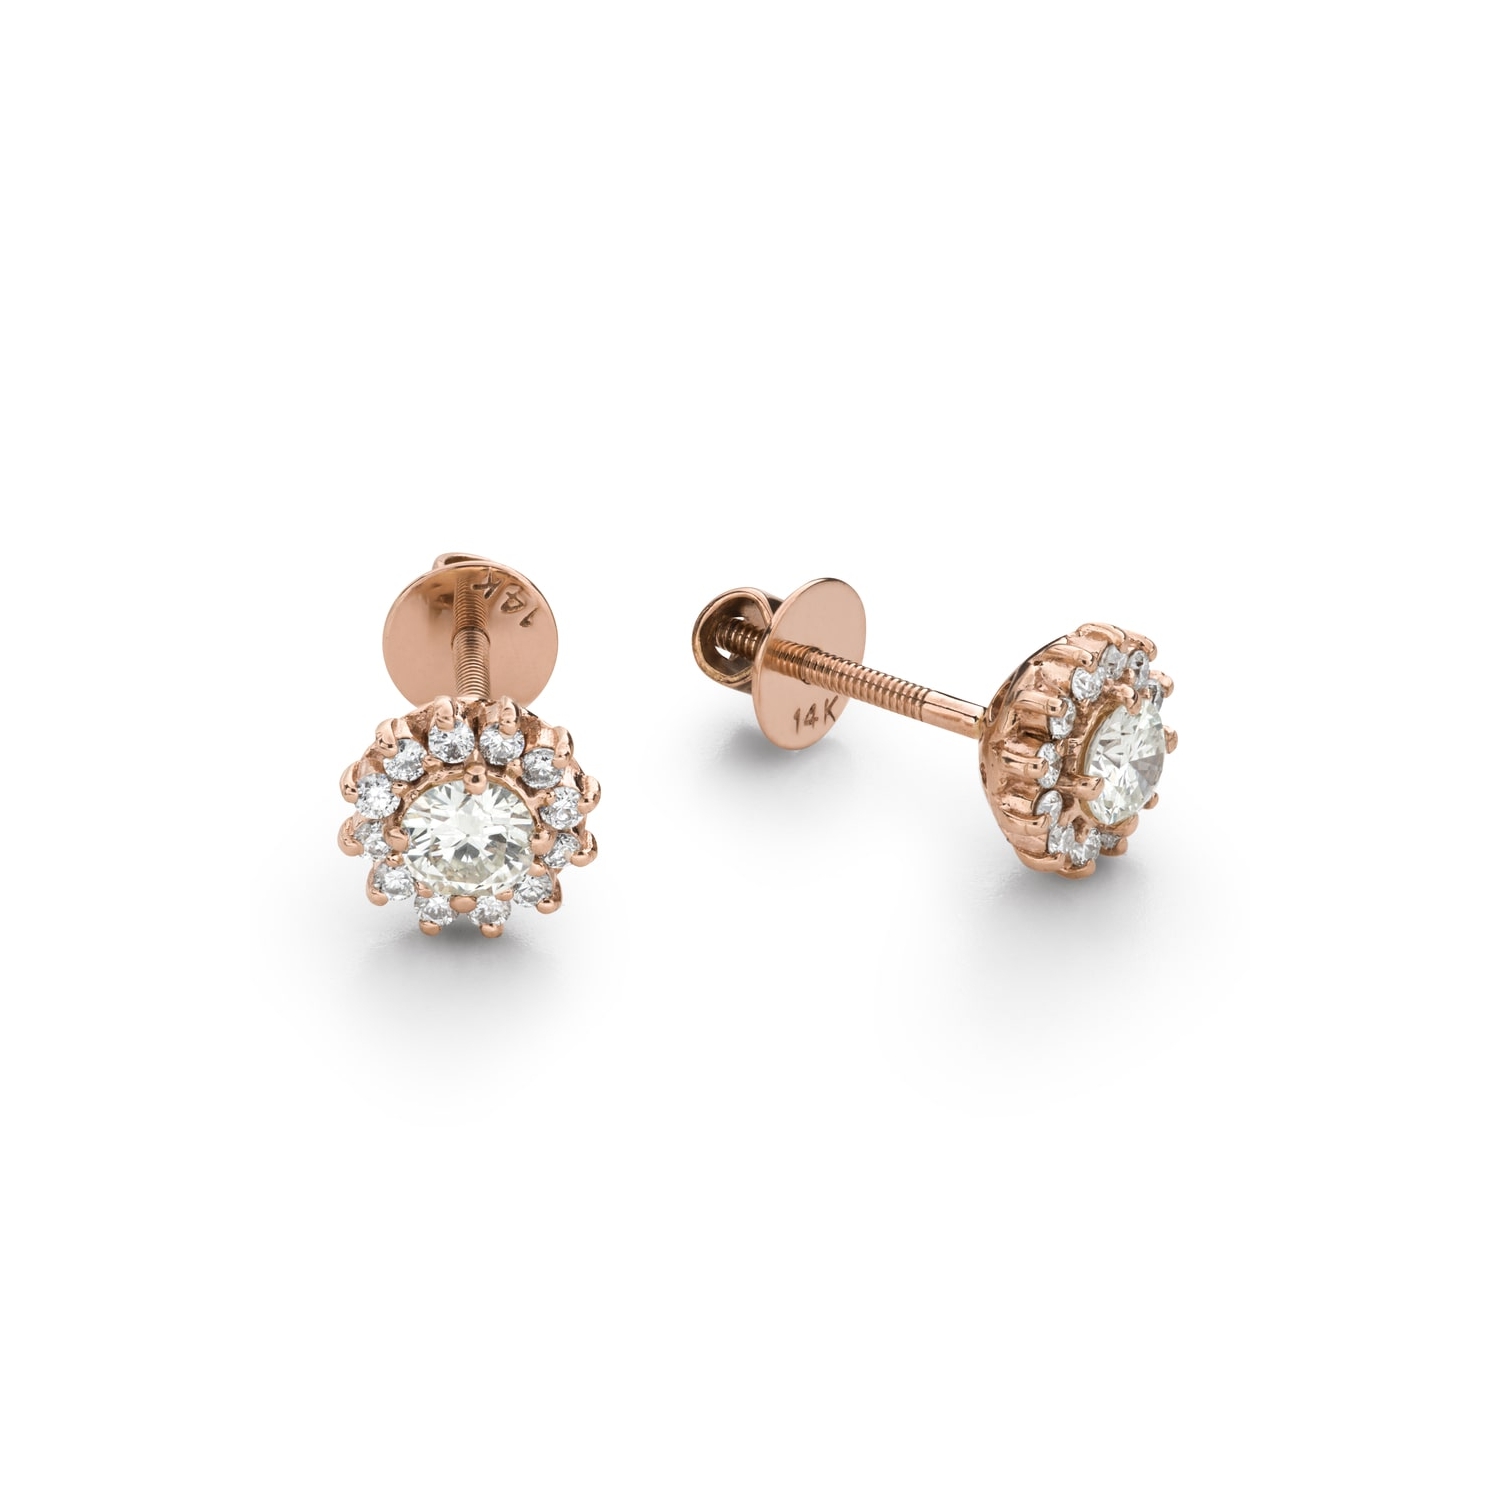 Gold earrings with brilliants "Elegance 36"